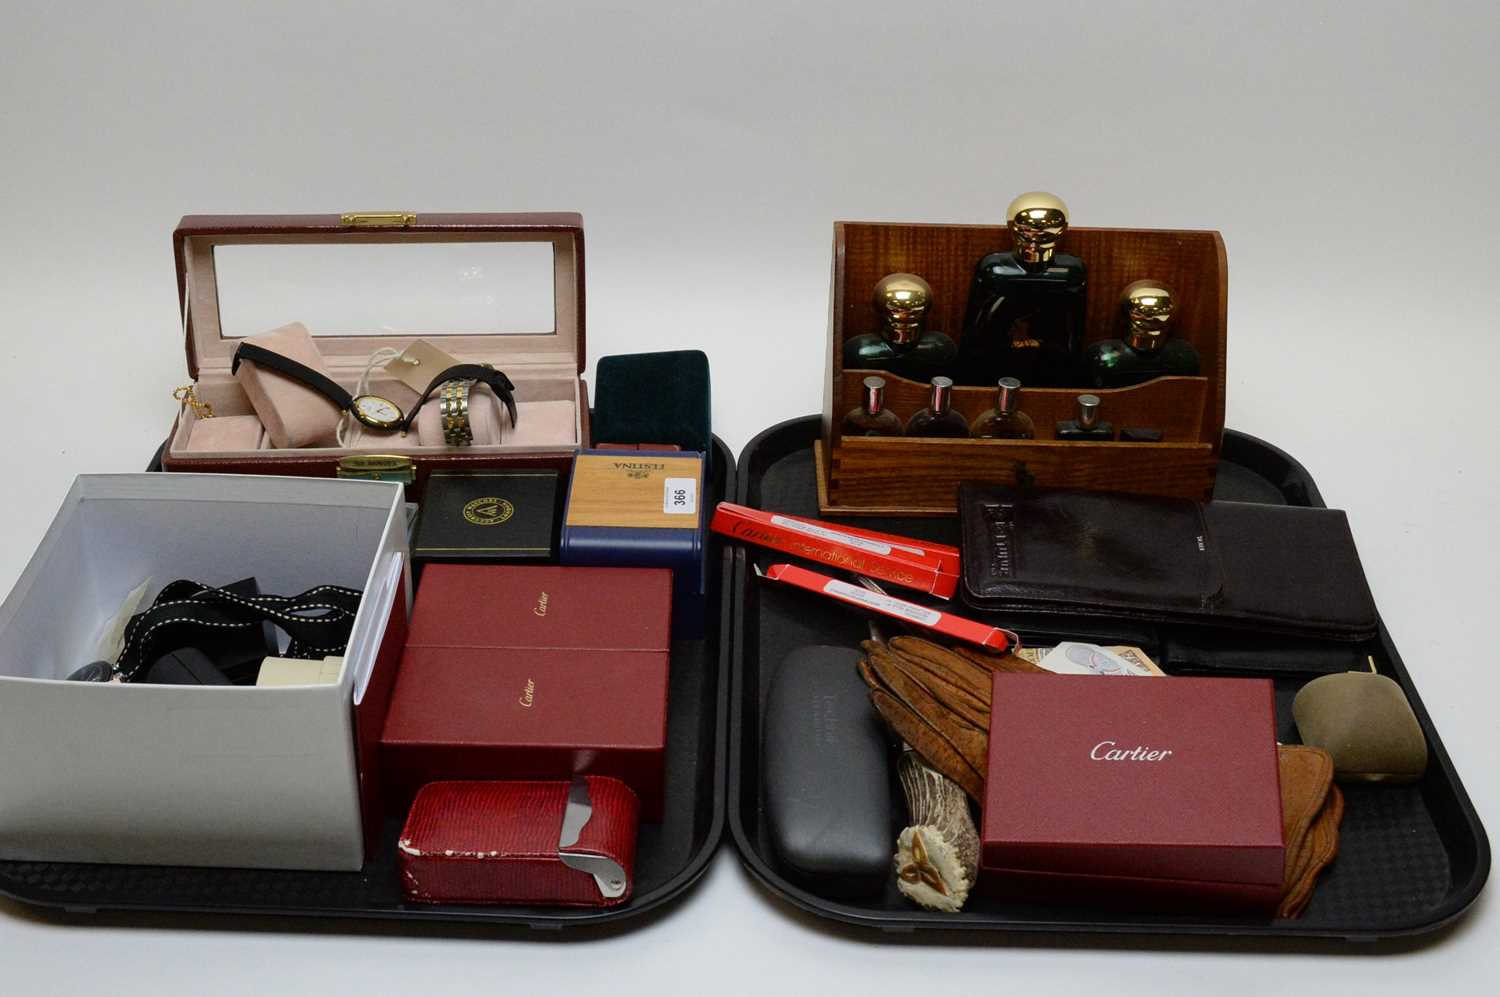 Lot 366 - Cartier jewellery/watch cleaning kits; and